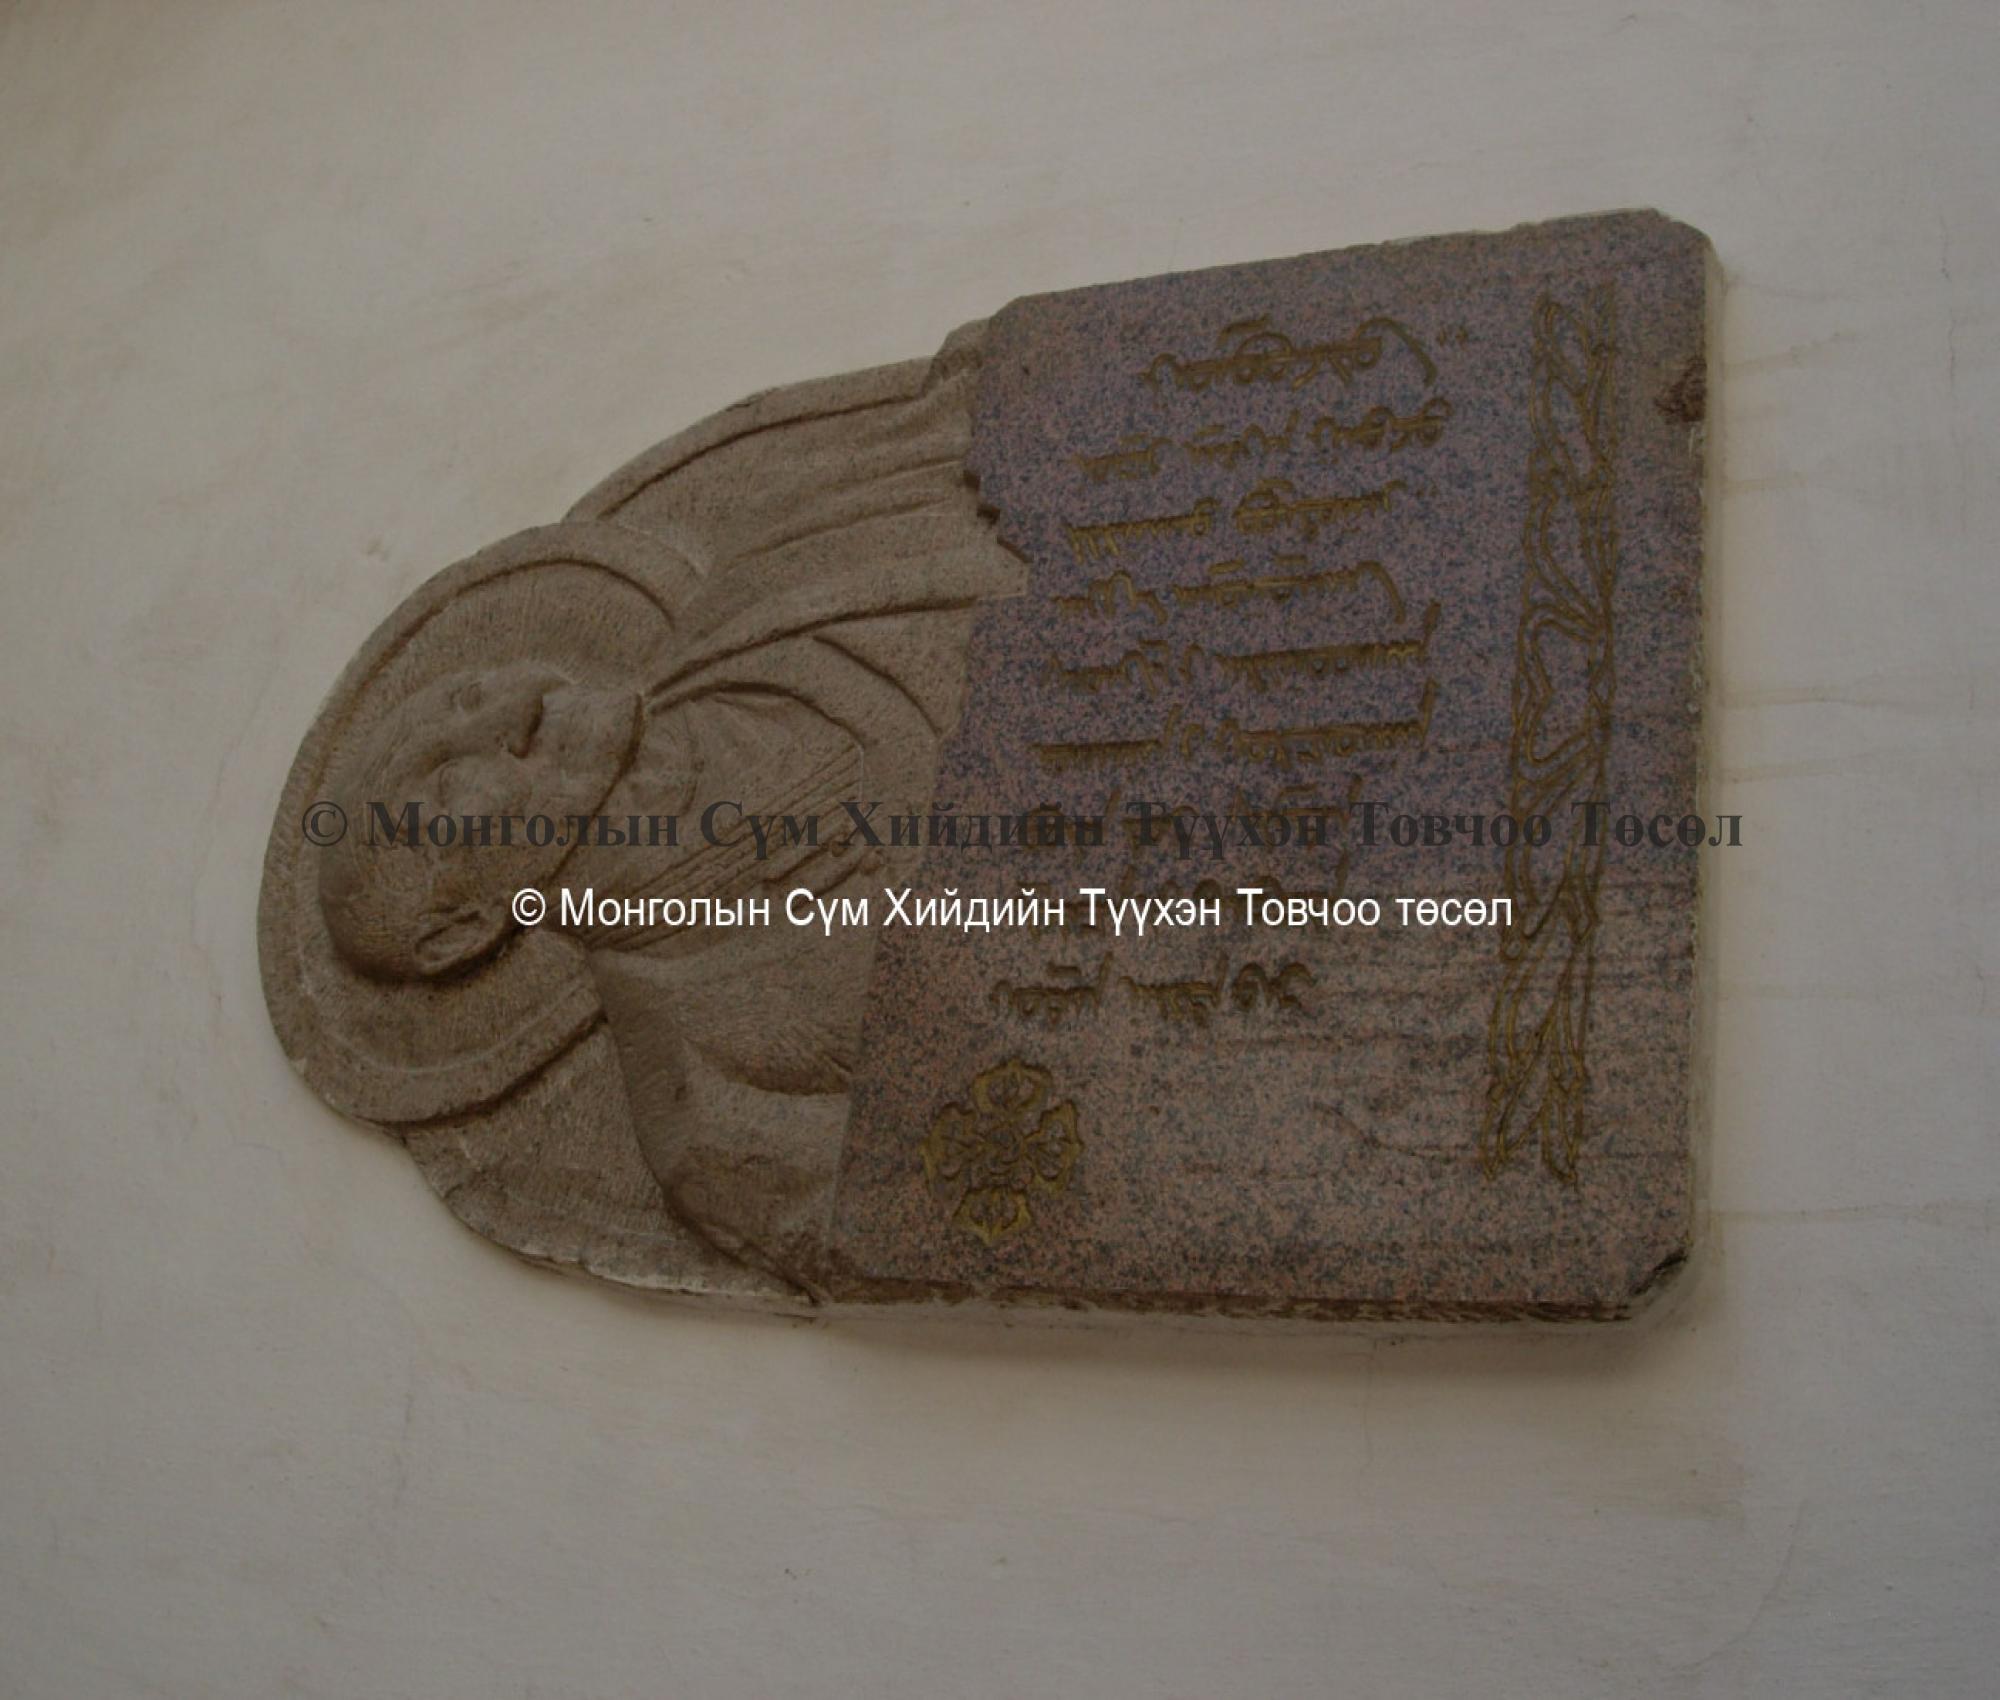 Commemoration plaque for S. Gombojaw (1901-1980), 